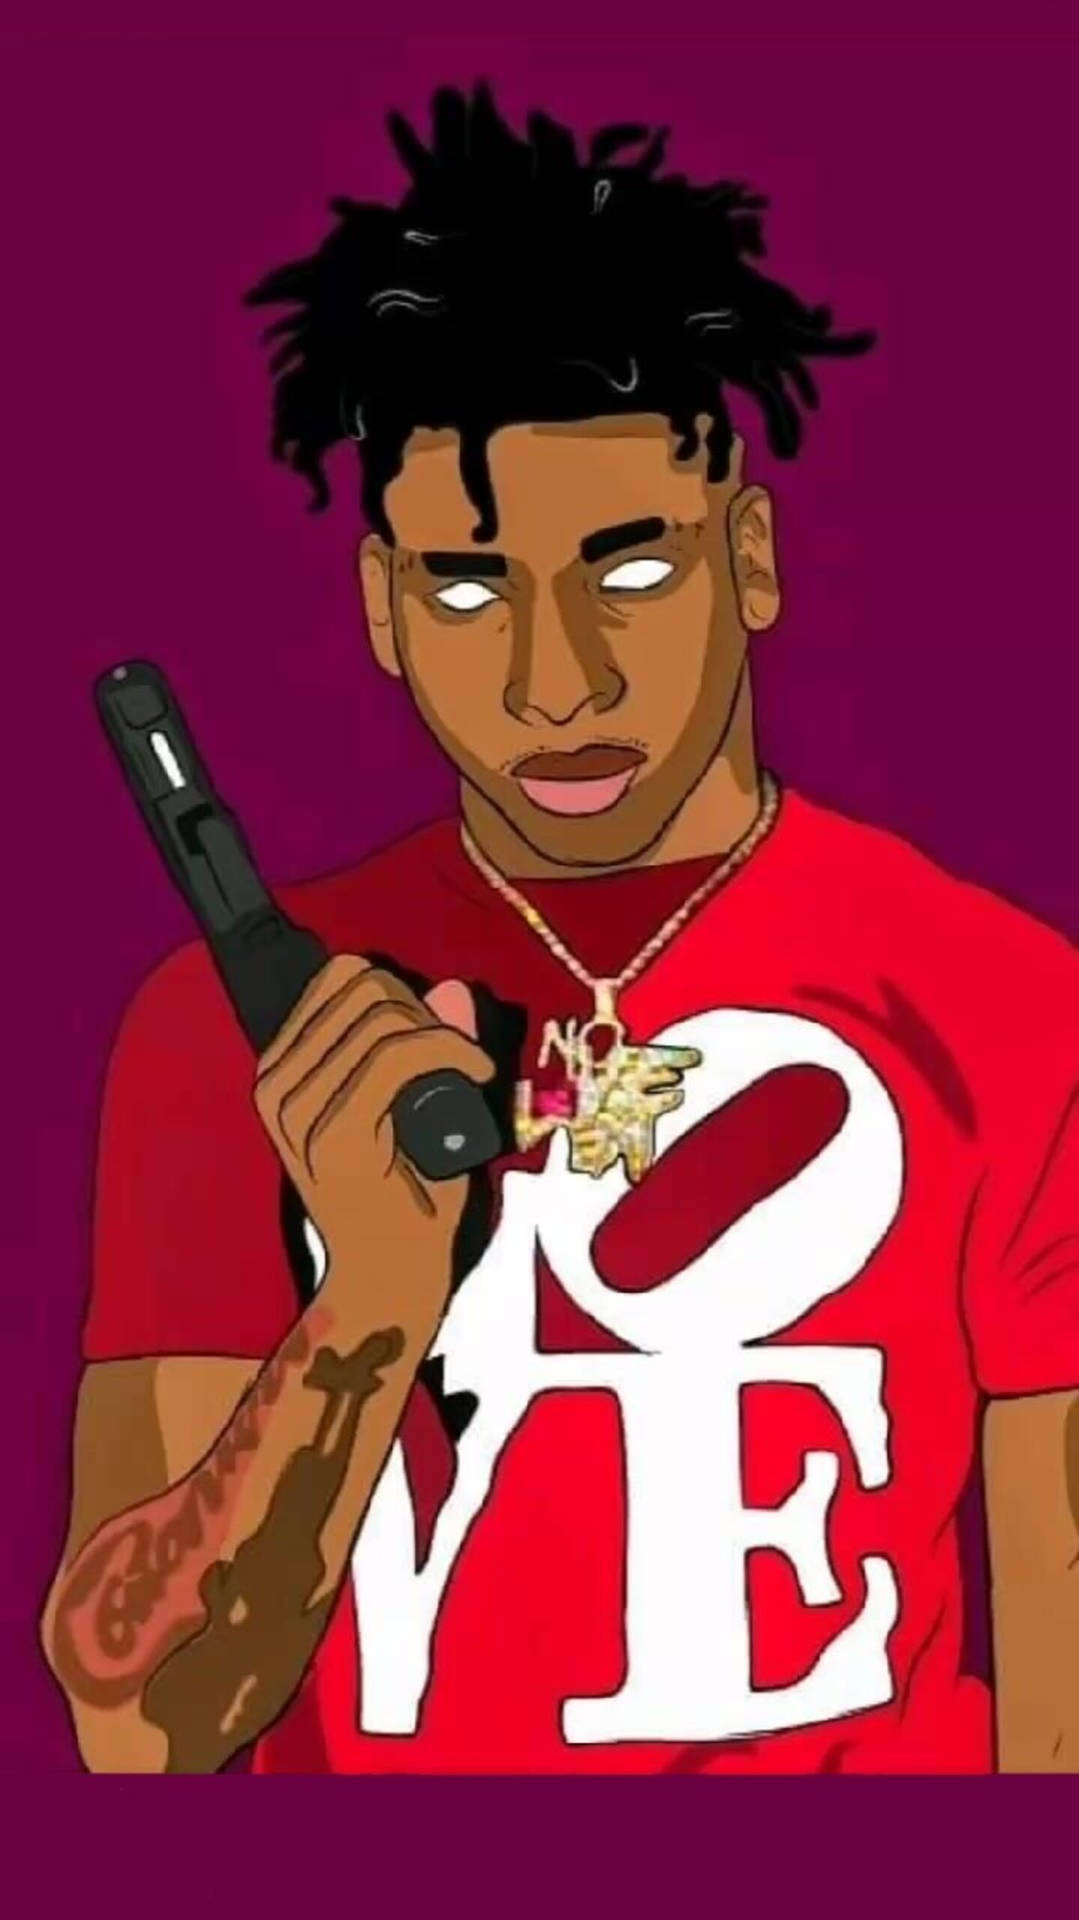 NLE Choppa showing his signature sound with a cartoonized artwork. Wallpaper